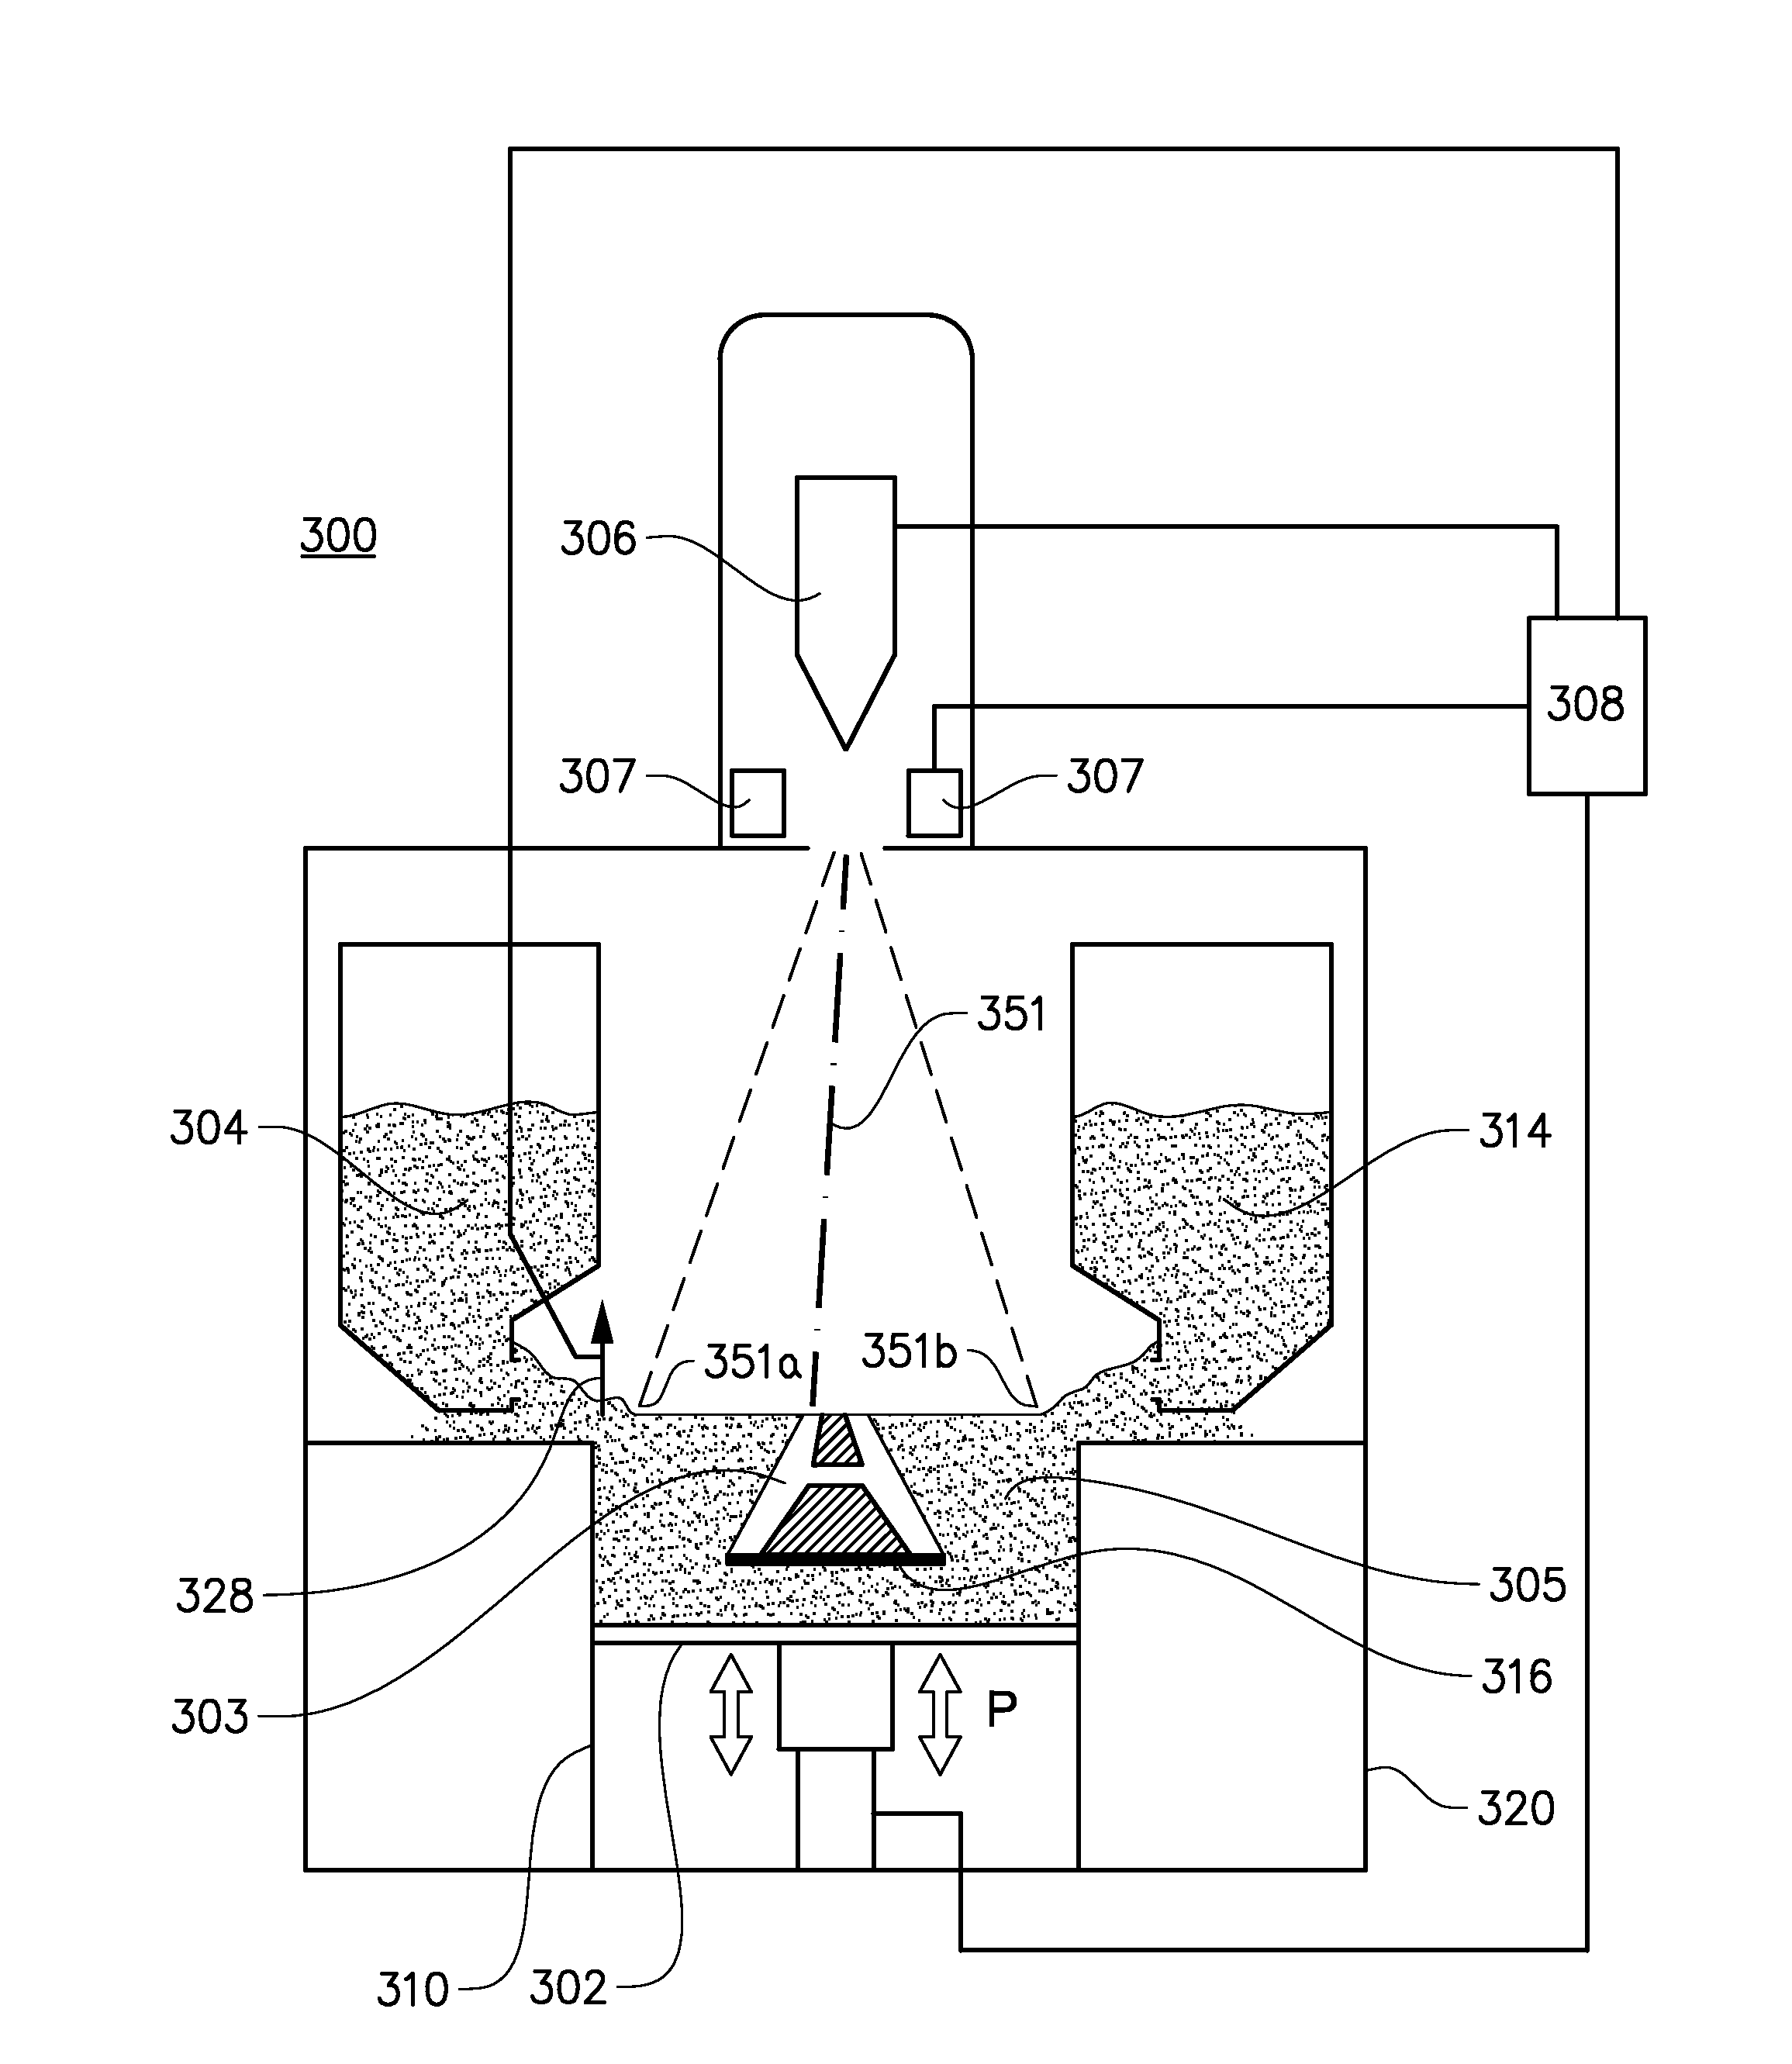 Method for improved powder layer quality in additive manufacturing